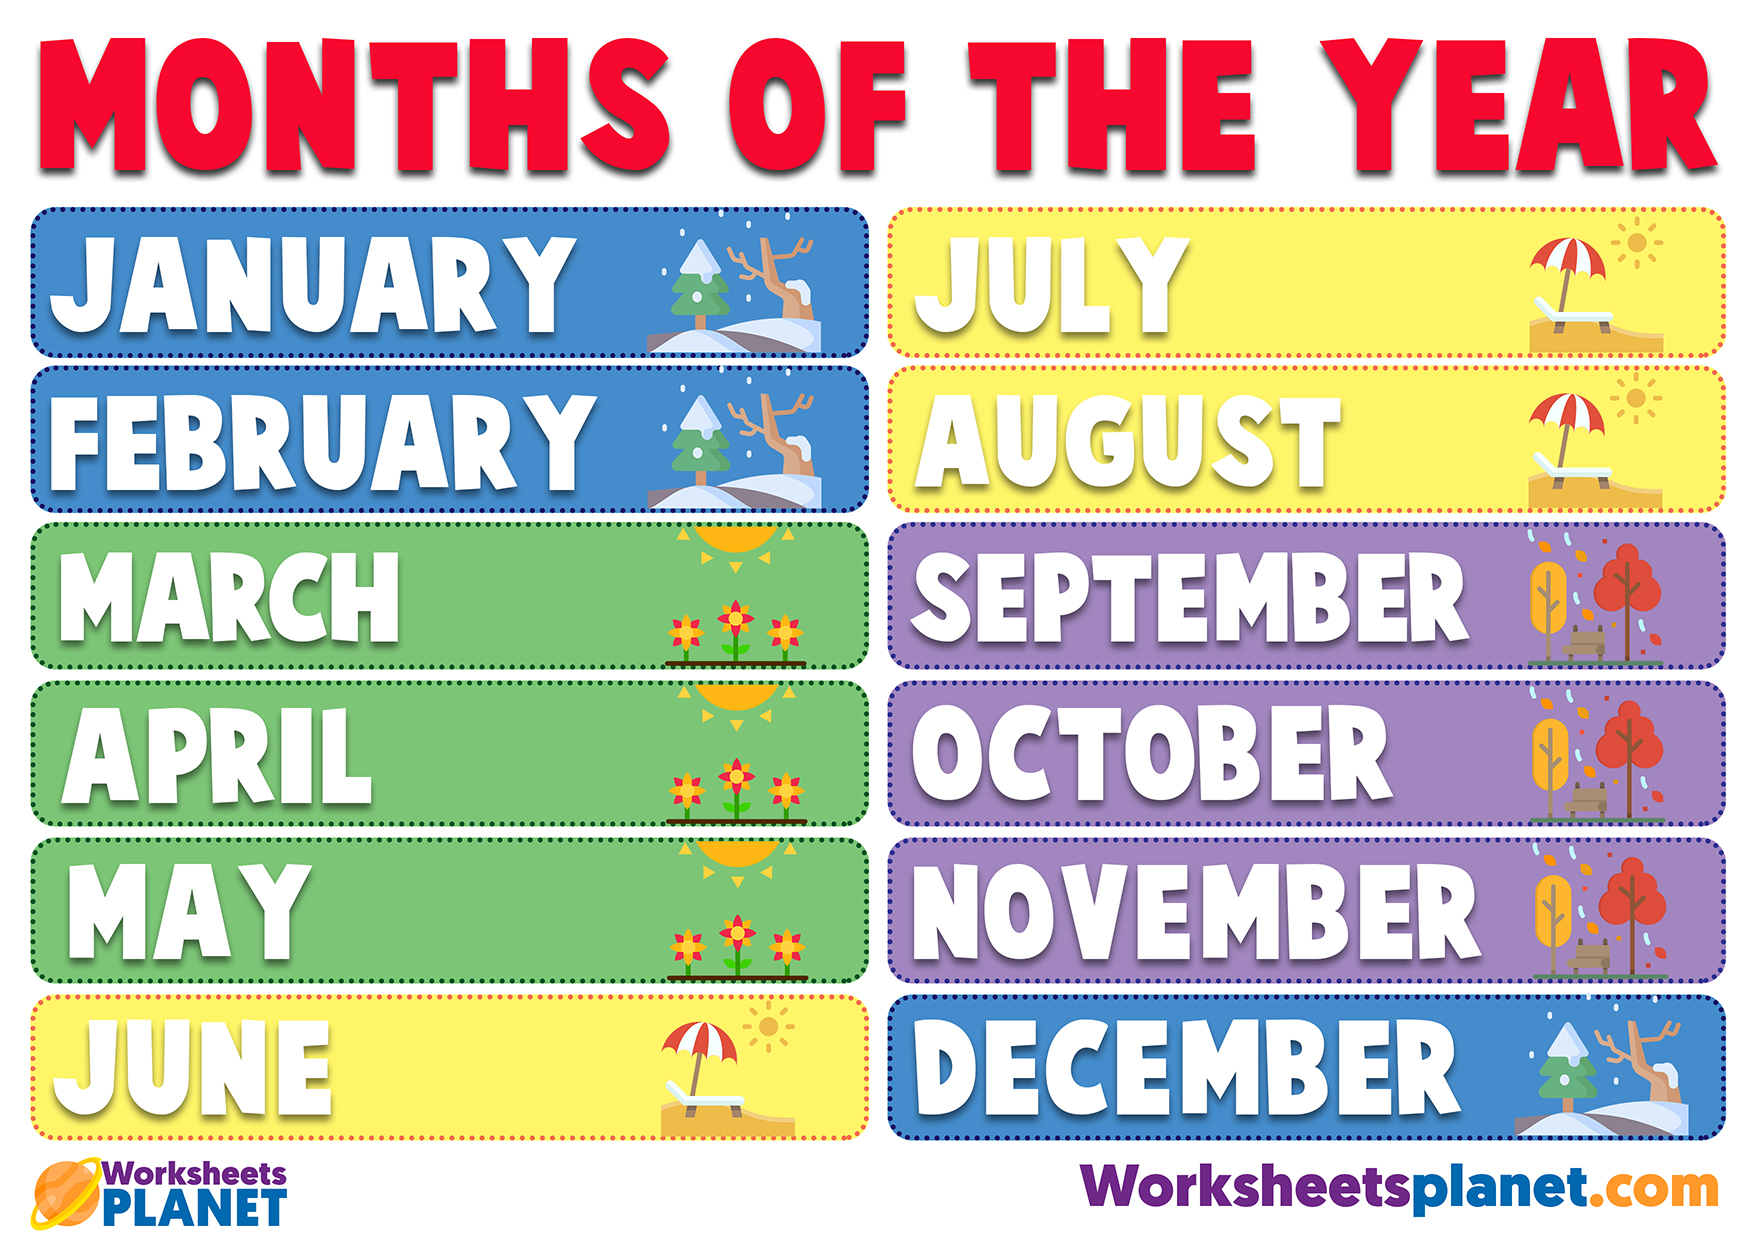 months-of-the-year-chart